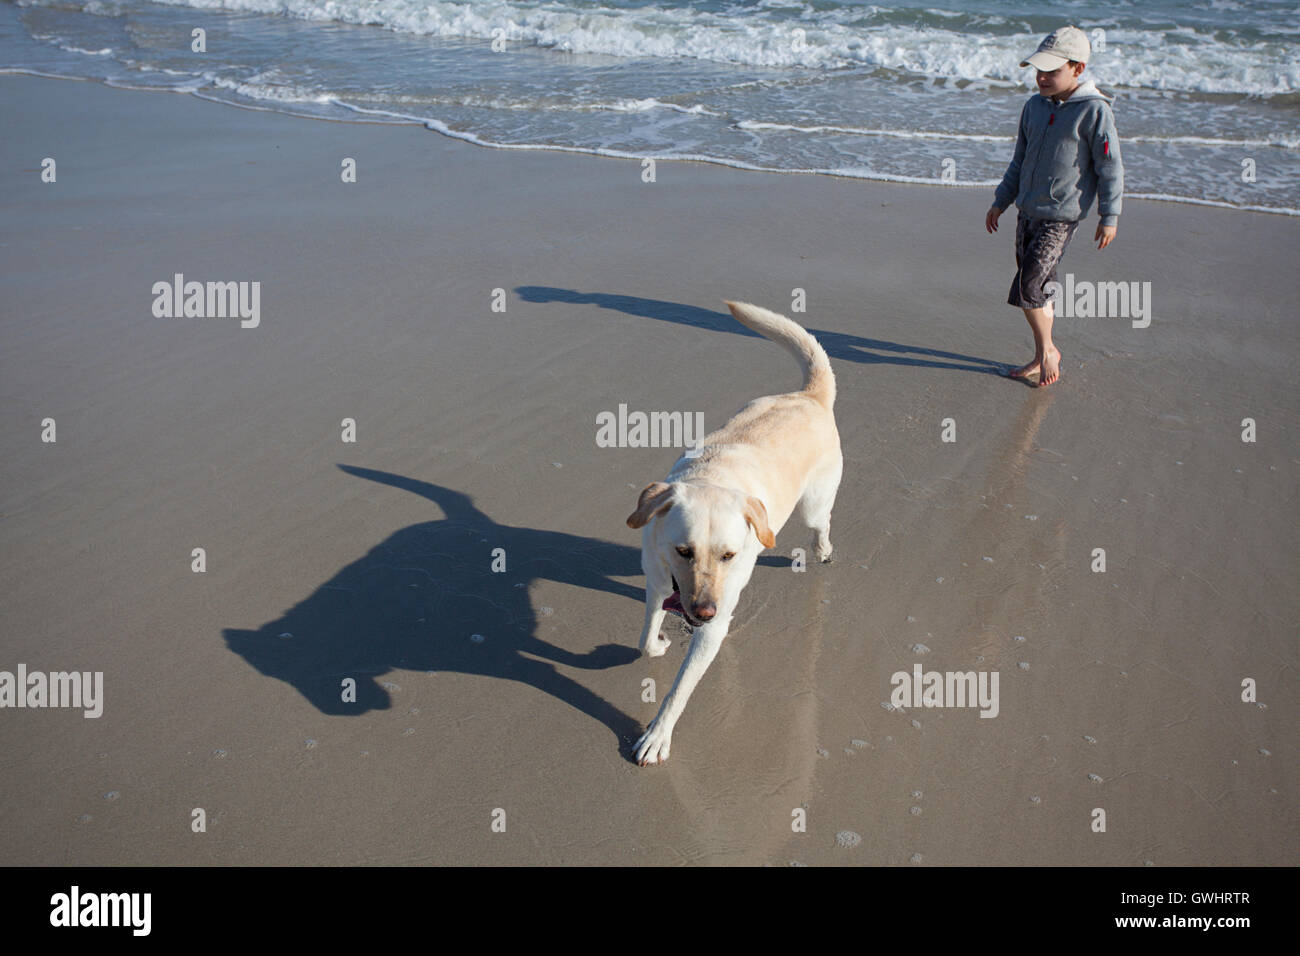 Young boy and dog on the beach, Milnerton Beach, South Africa Stock Photo